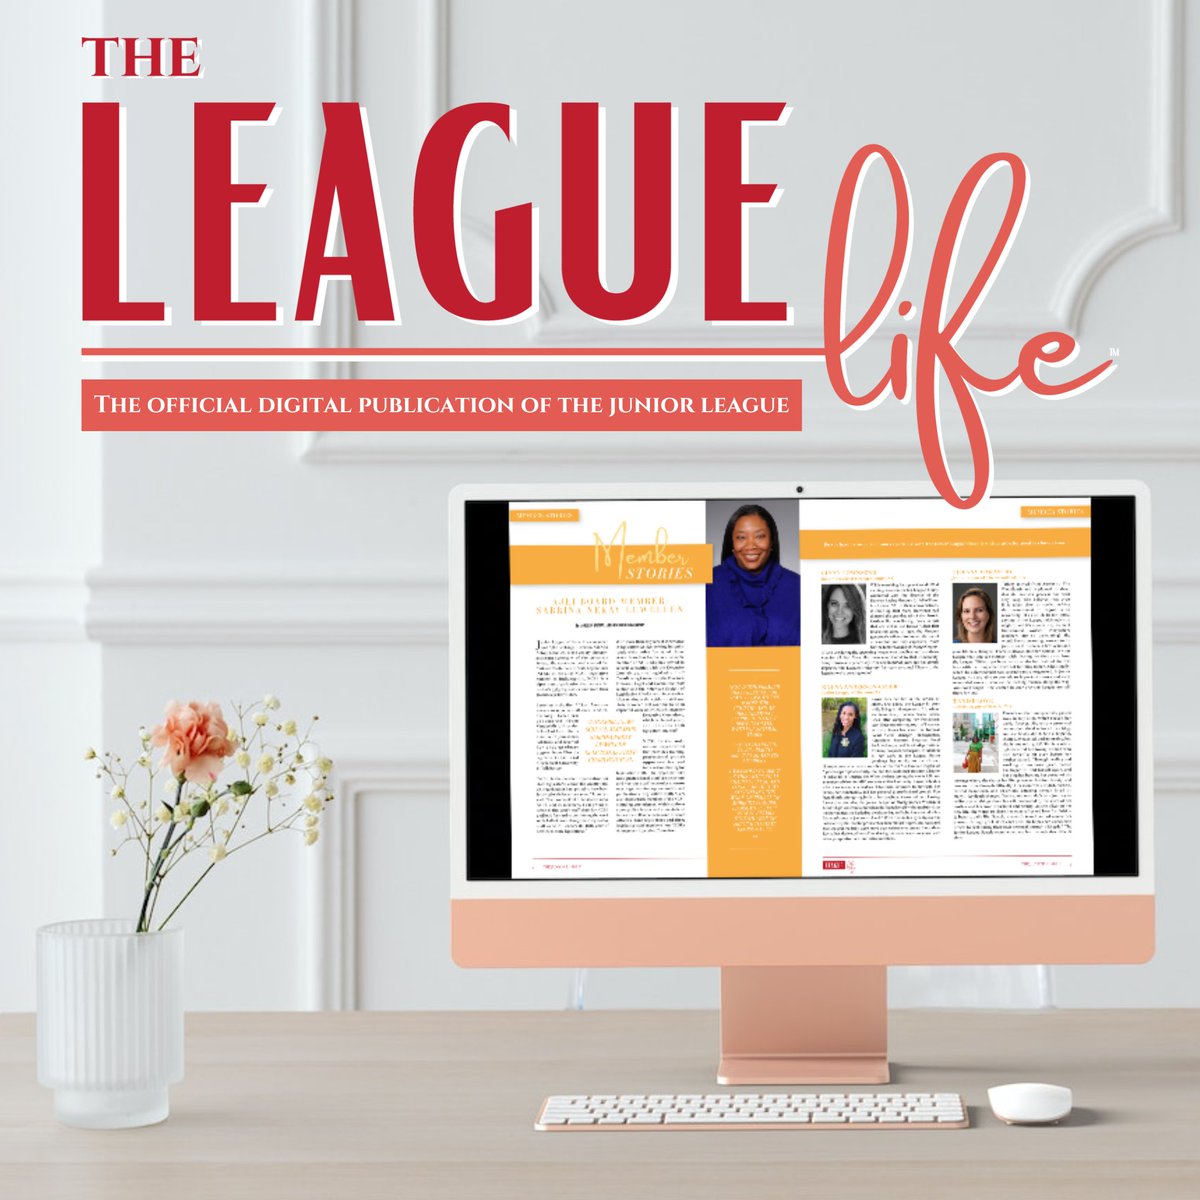 We are thrilled to launch the newest iteration of the Junior League Magazine, “The League Life!” This magazine is now available in an easy-to-navigate digital format. Click here to take a look inside: ajli.org/?nd=league-lif… #JuniorLeague #LeagueLife #magazine #bettertogether